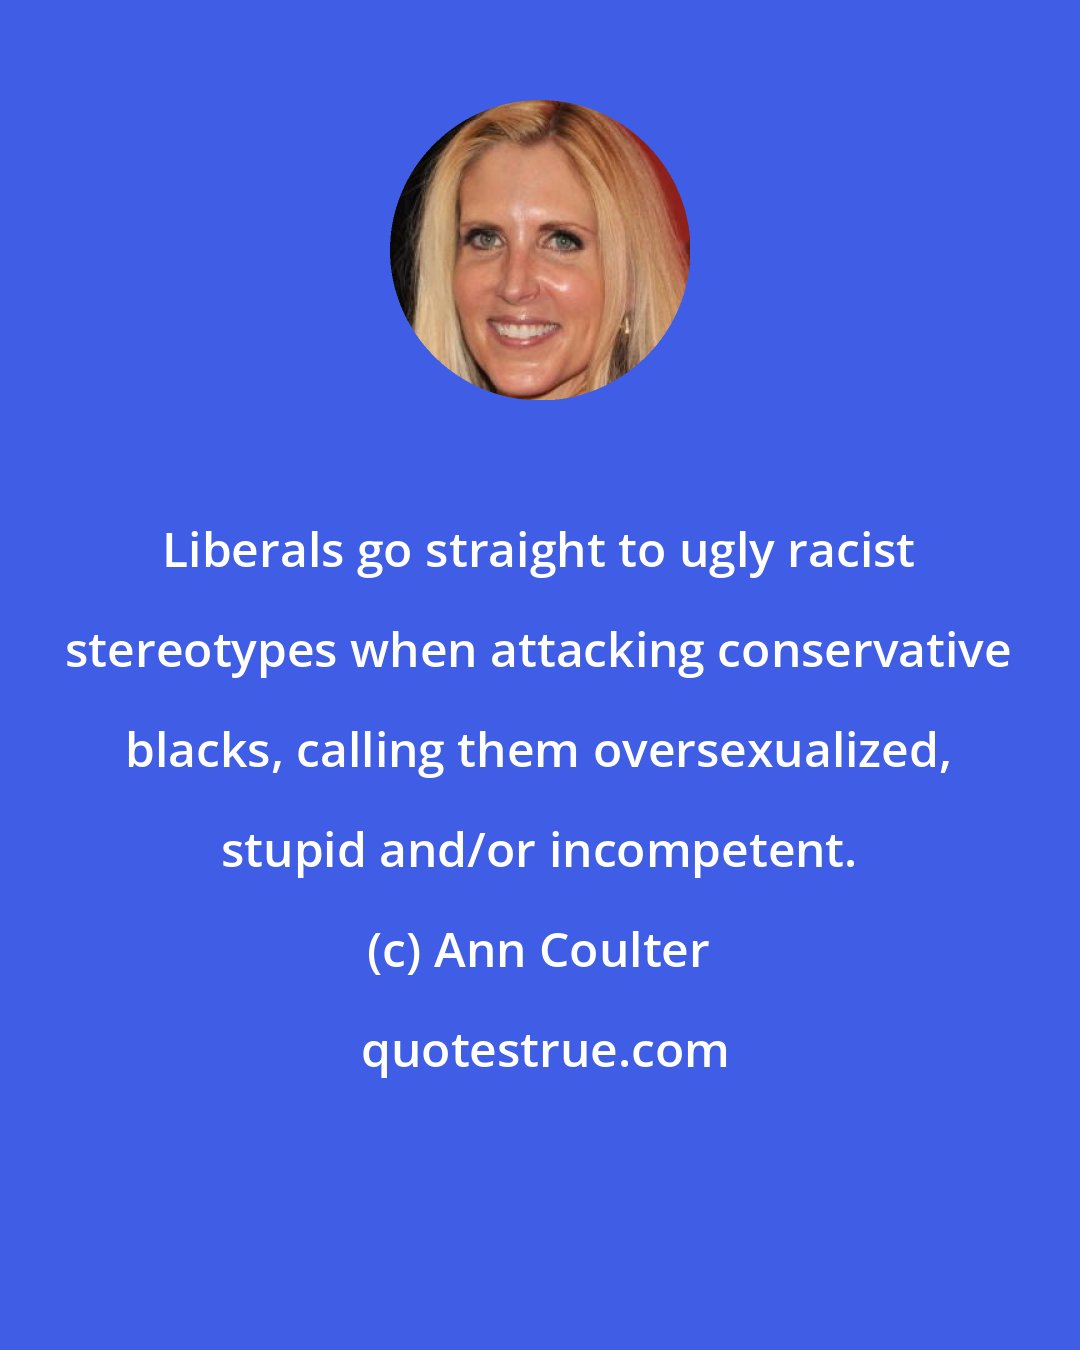 Ann Coulter: Liberals go straight to ugly racist stereotypes when attacking conservative blacks, calling them oversexualized, stupid and/or incompetent.